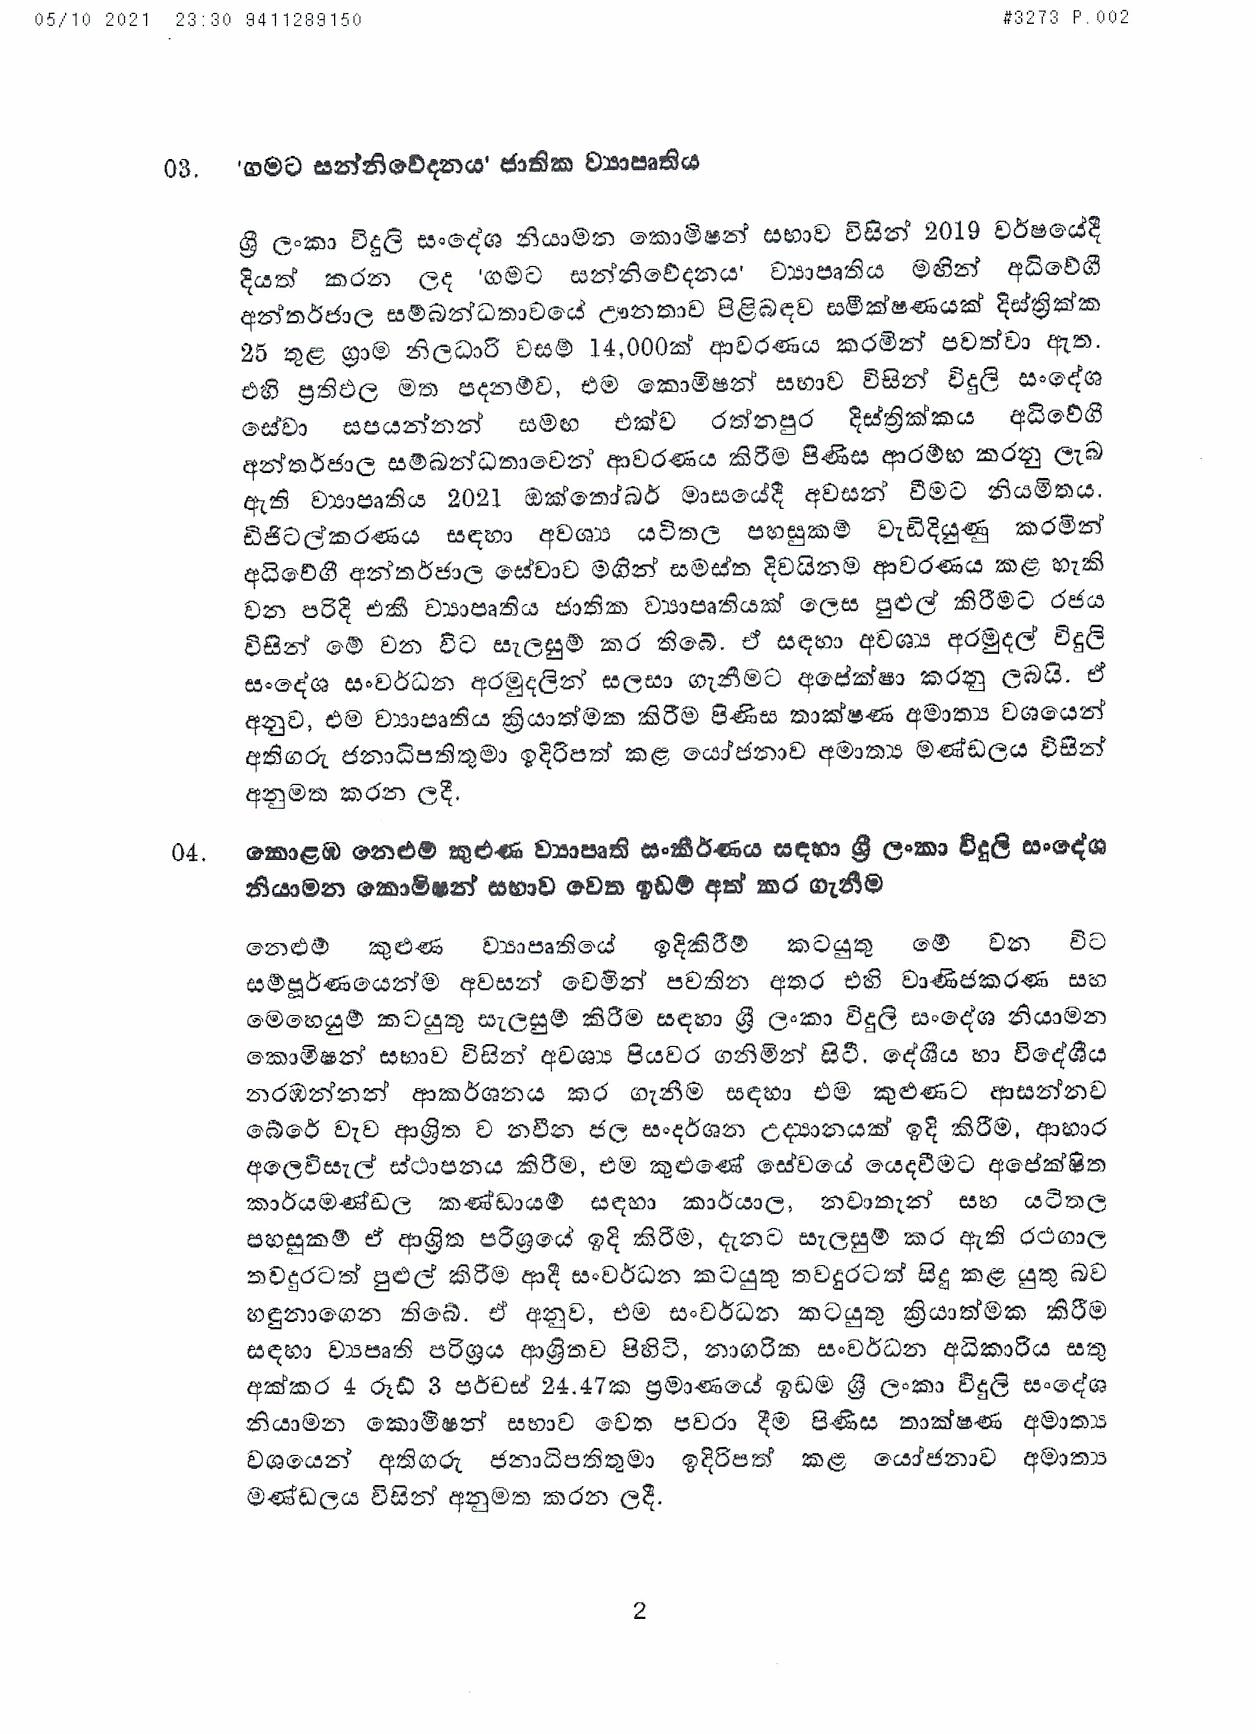 Cabinet Decision on 05.10.2021 page 002